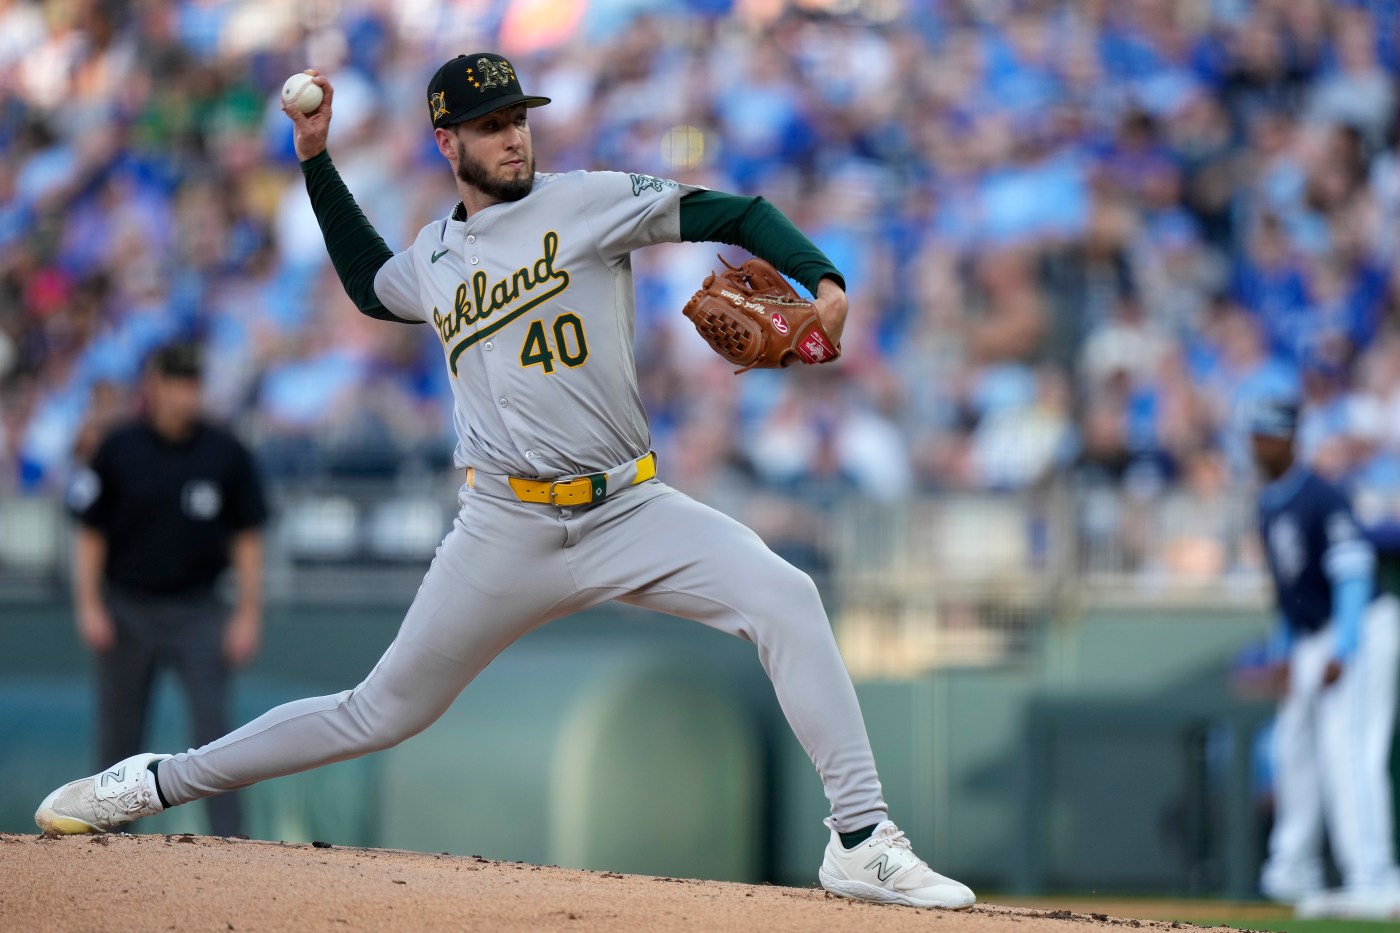 athletics’-downward-spiral-continues-with-loss-to-royals